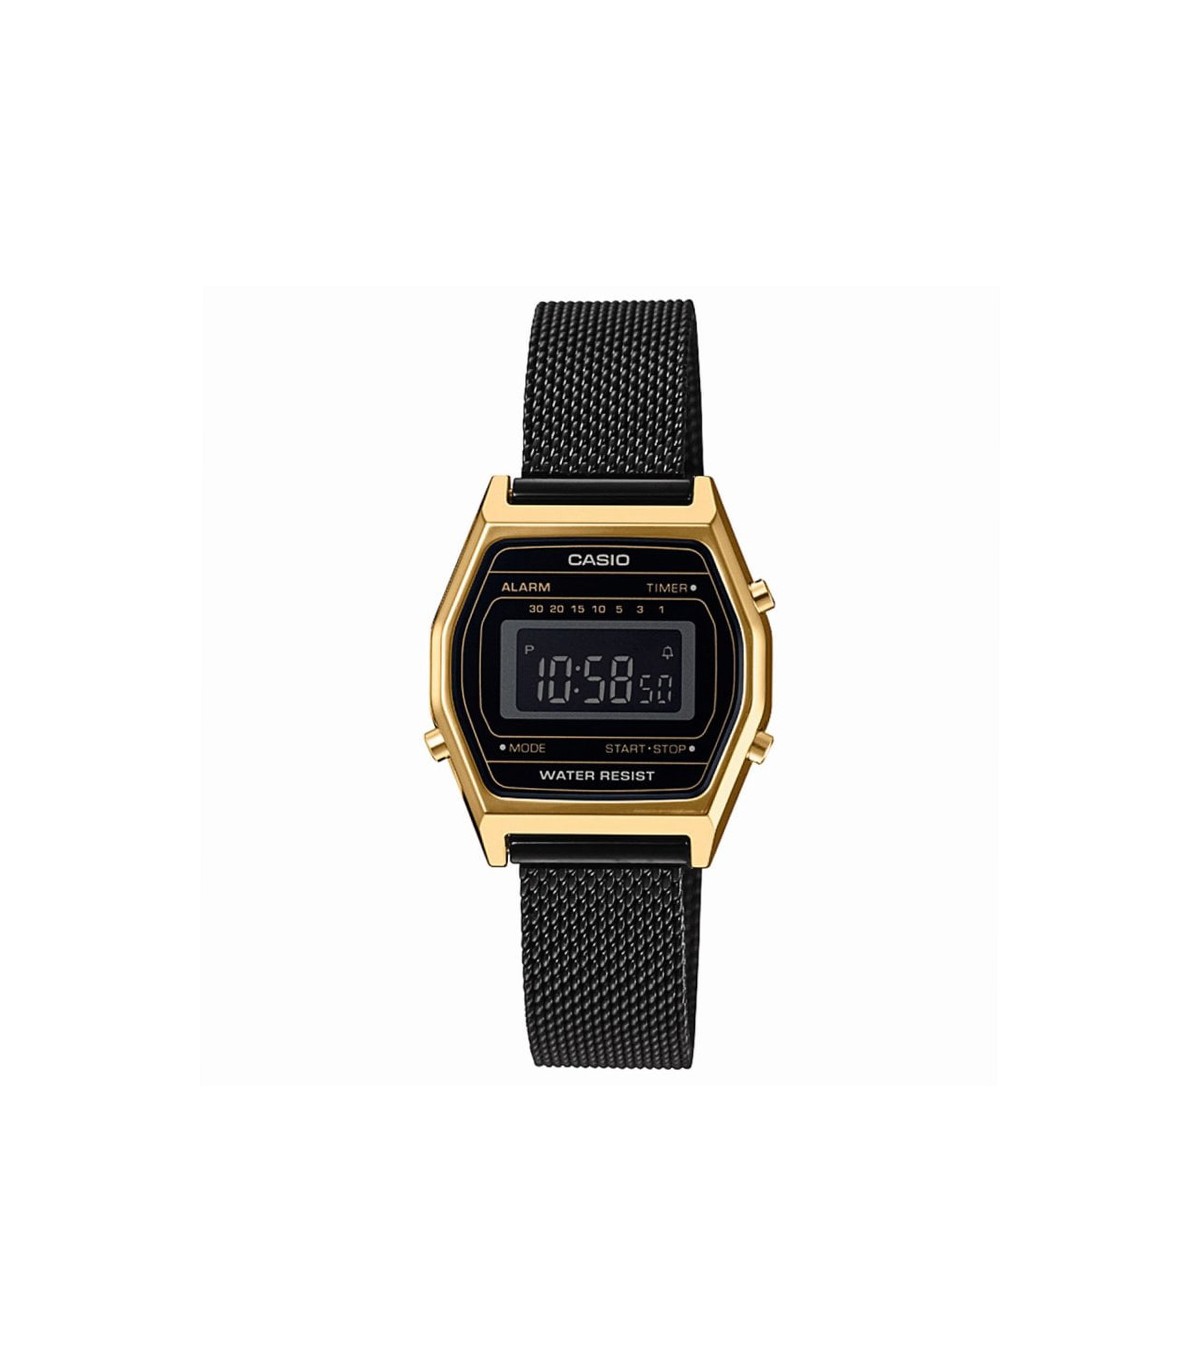 Casio Woman's Watch - Vintage Mini 30mm Gold and Black 0